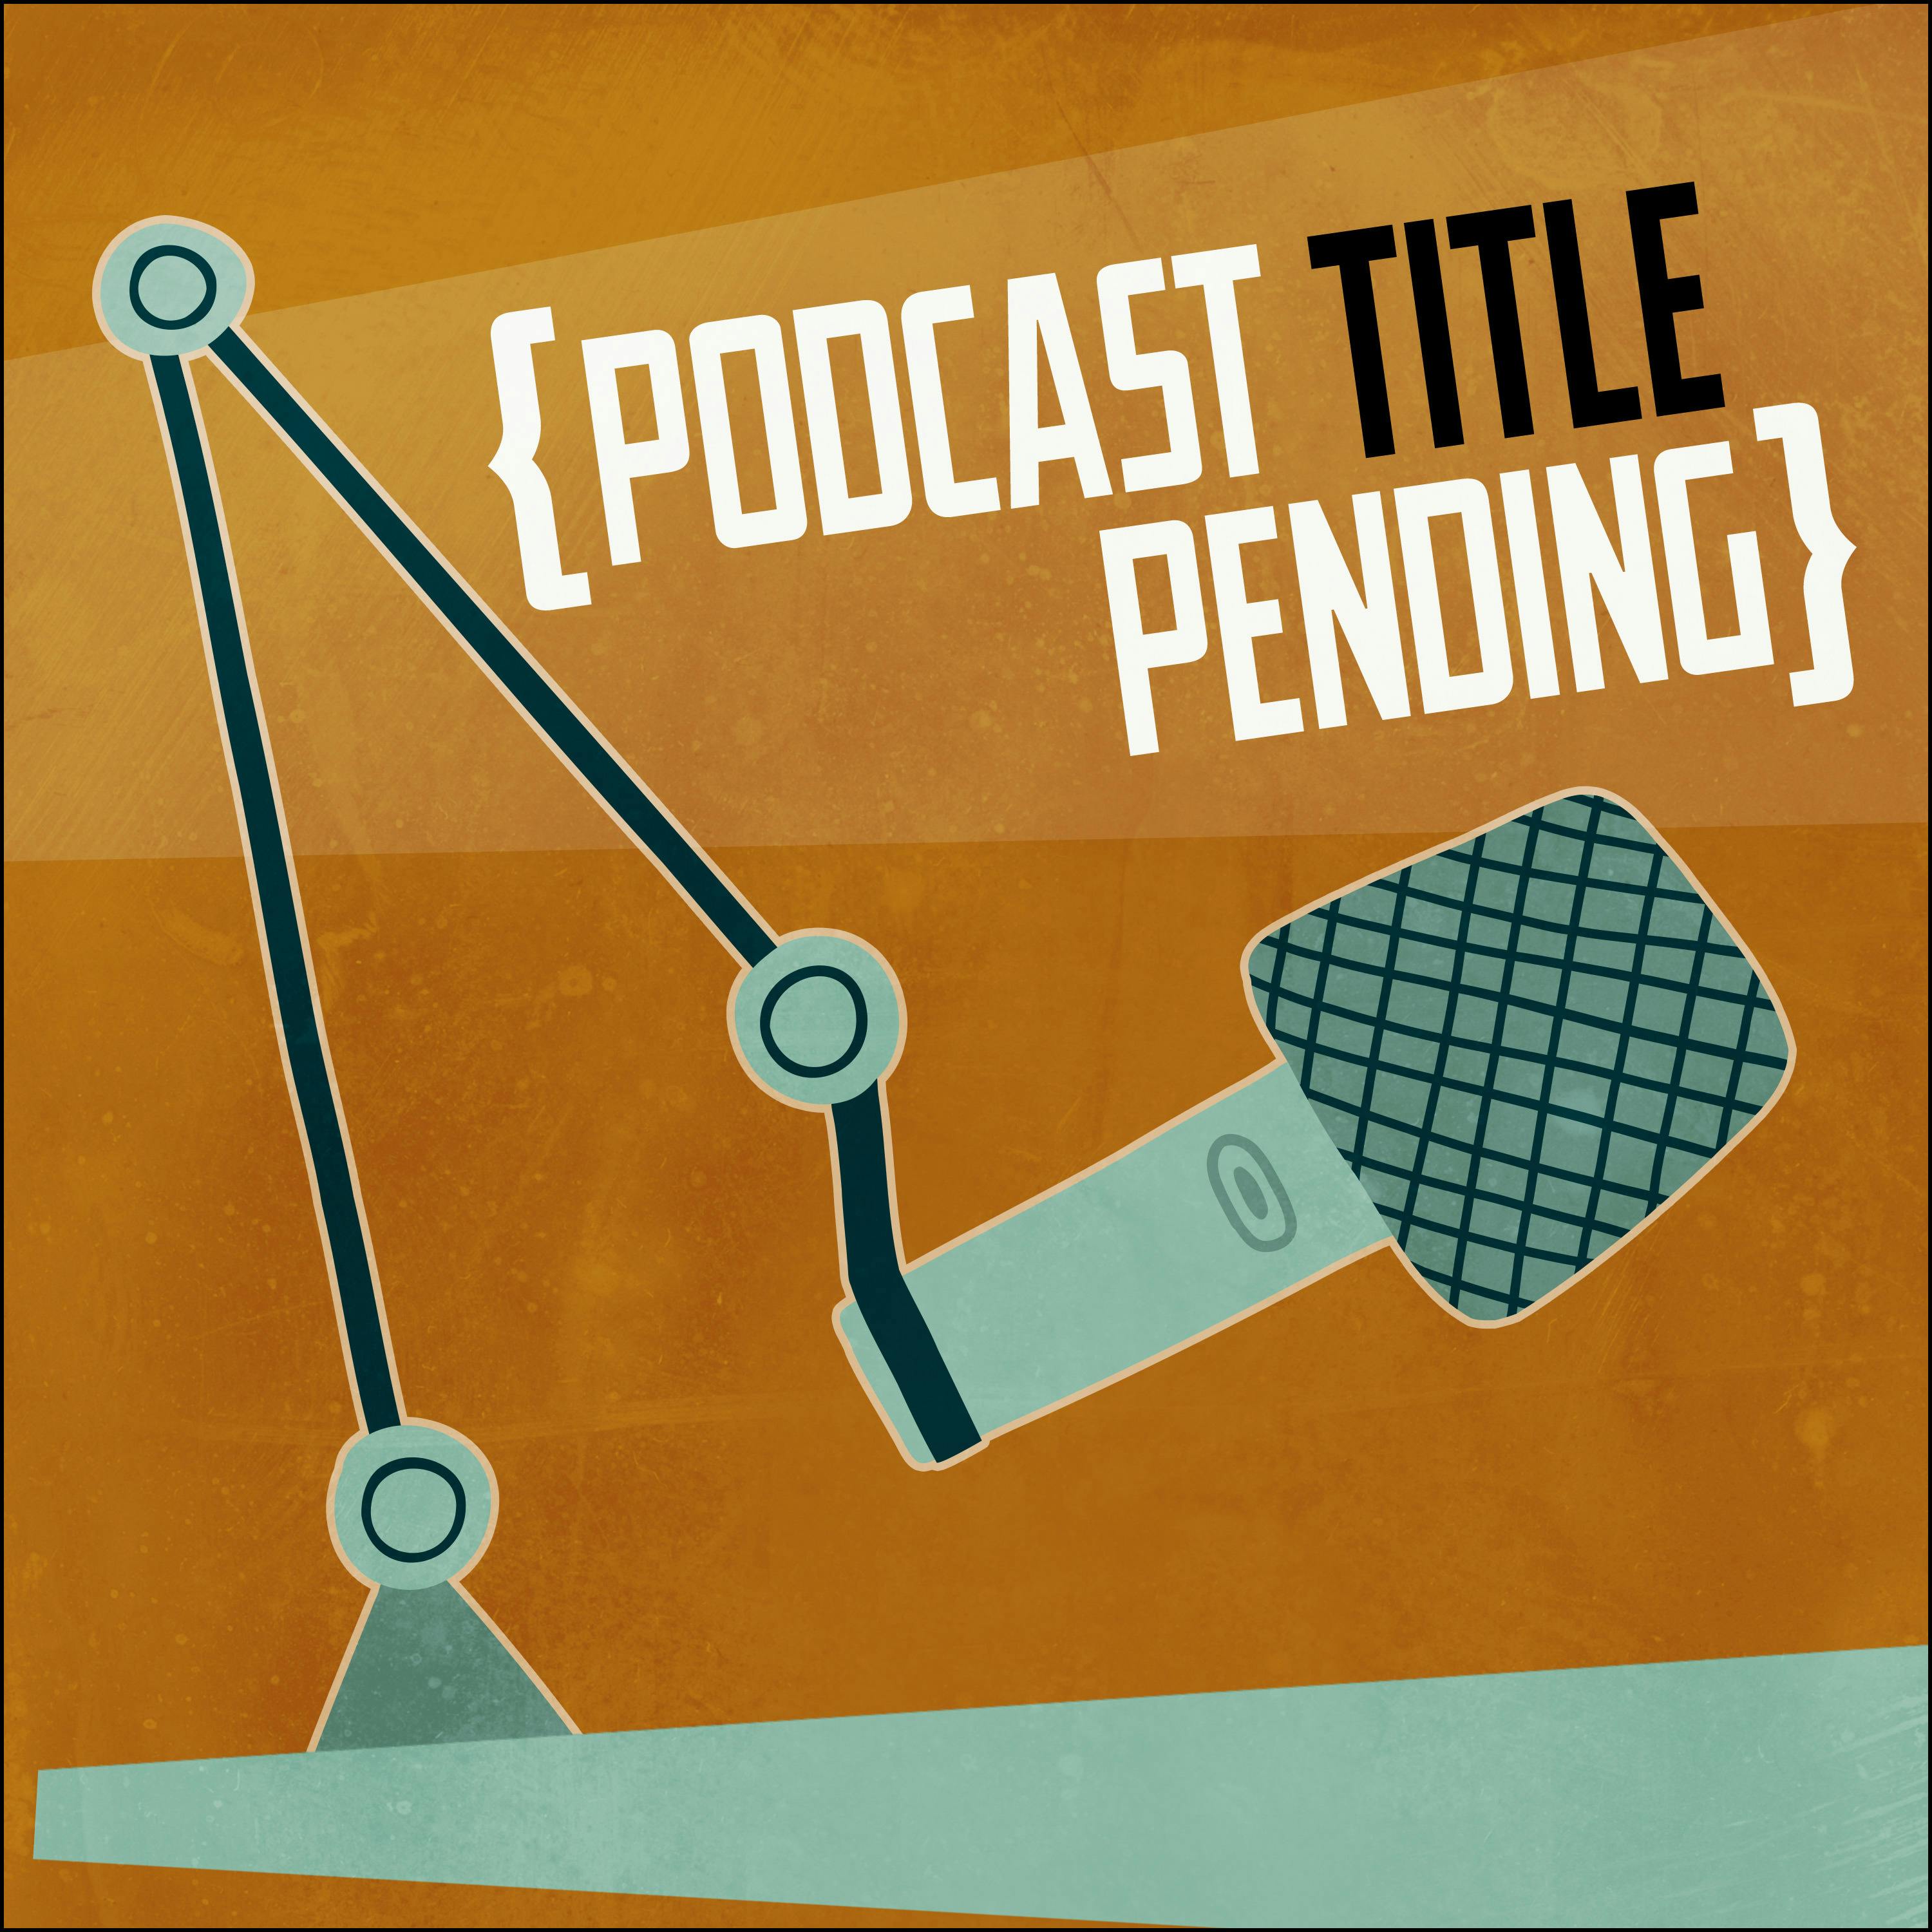 Coming Soon – {Podcast Title Pending}